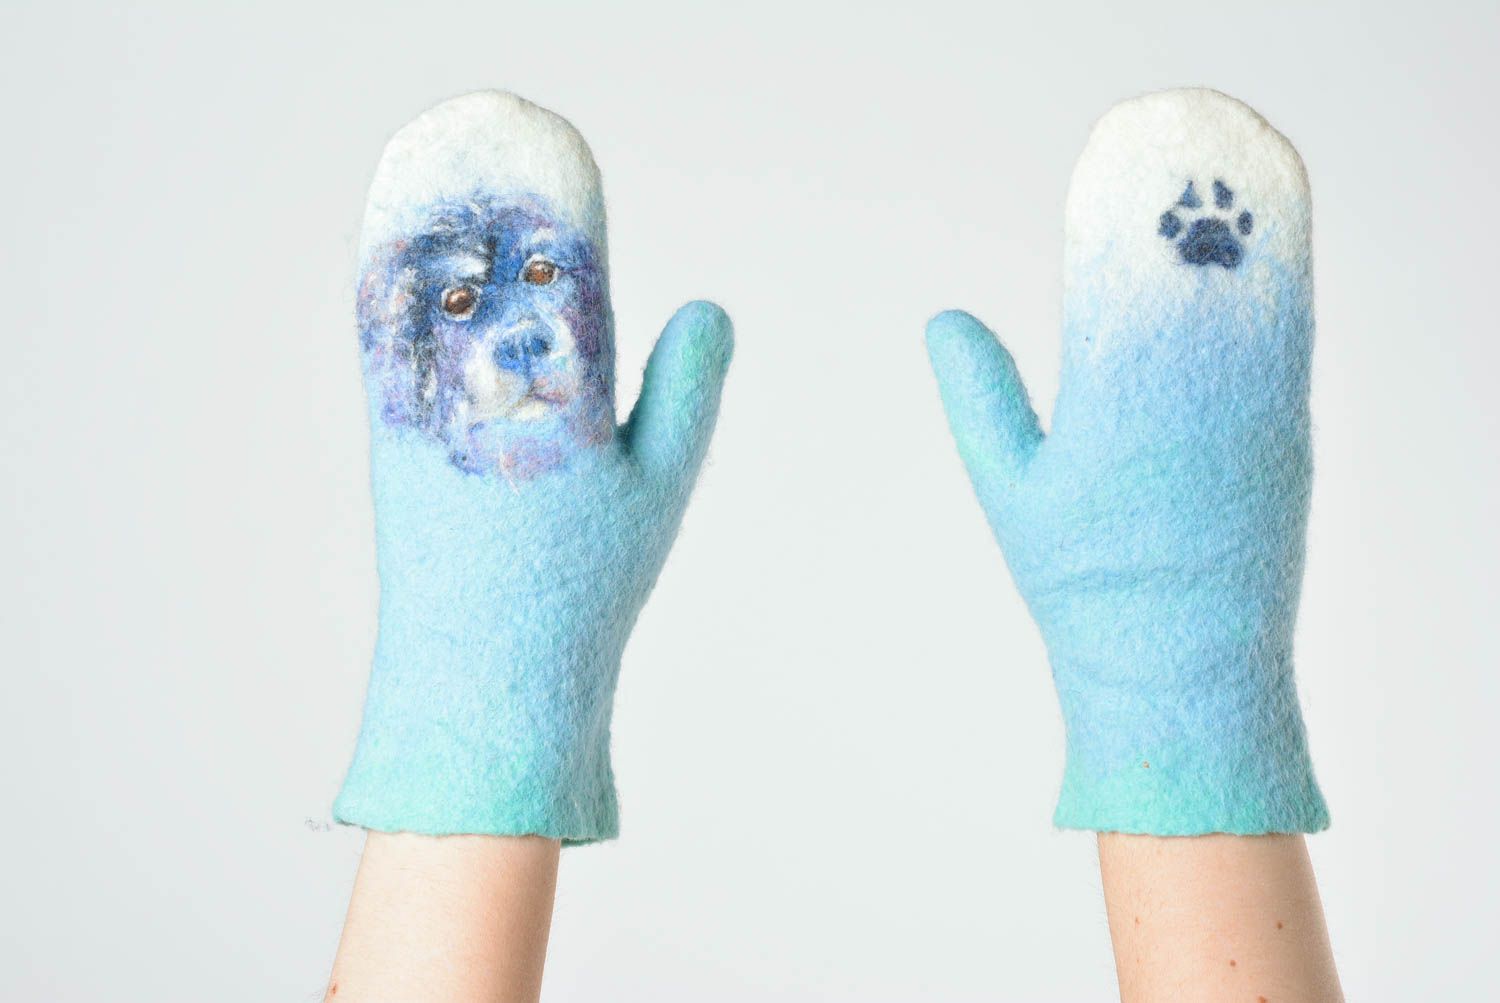 Handmade felted mittens wool knit mittens warm mittens mittens with a dog image photo 1